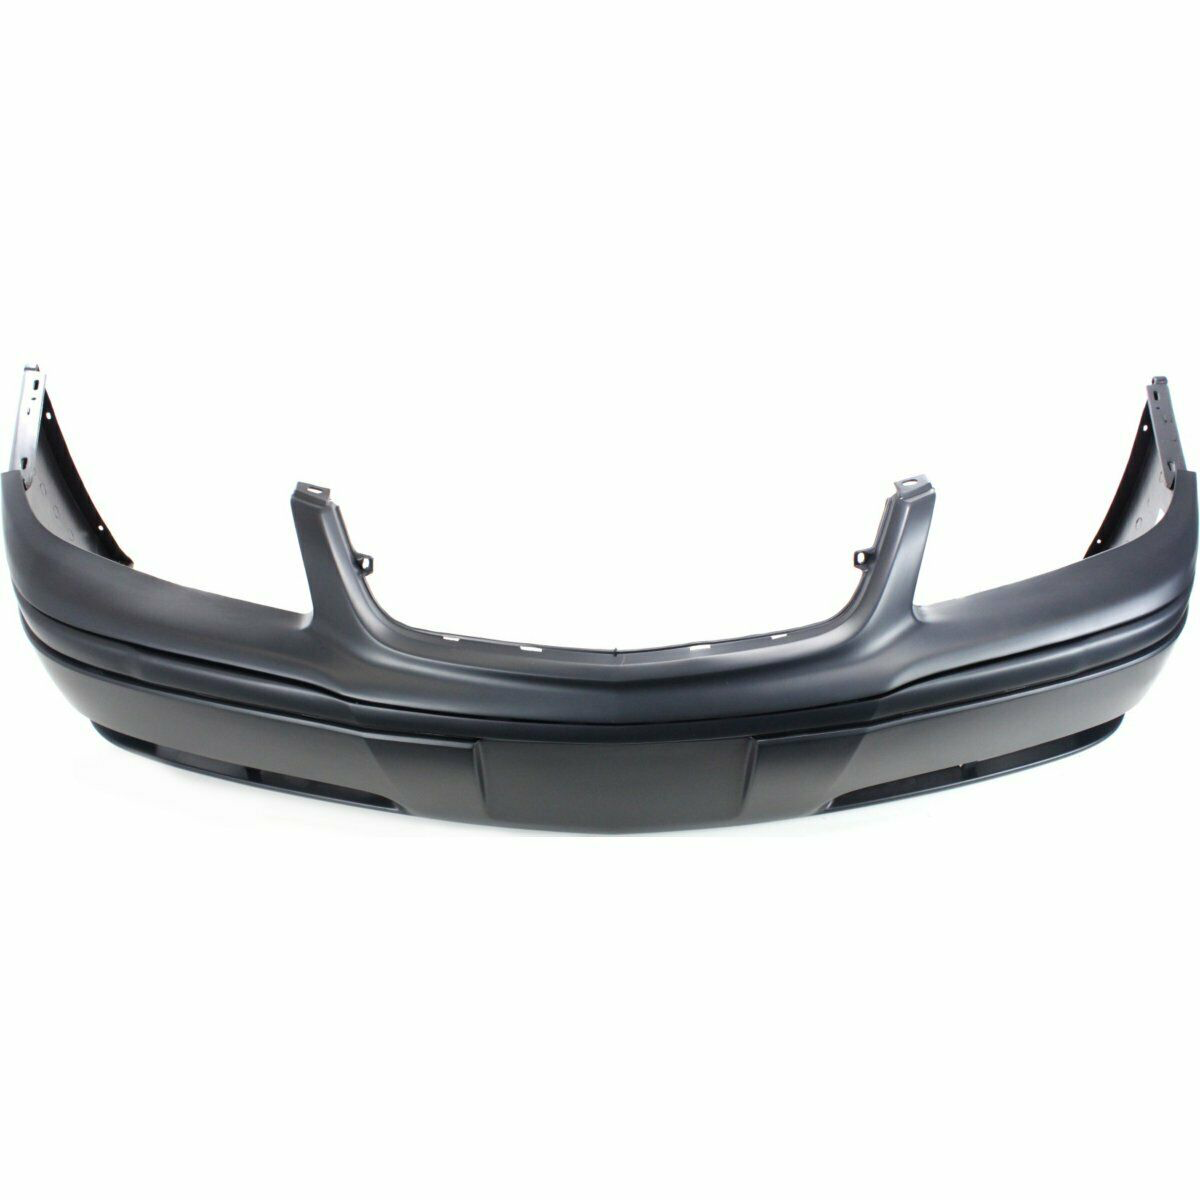 2000-2002 Chevy Impala (Fog Holes) Front Bumper Painted to Match